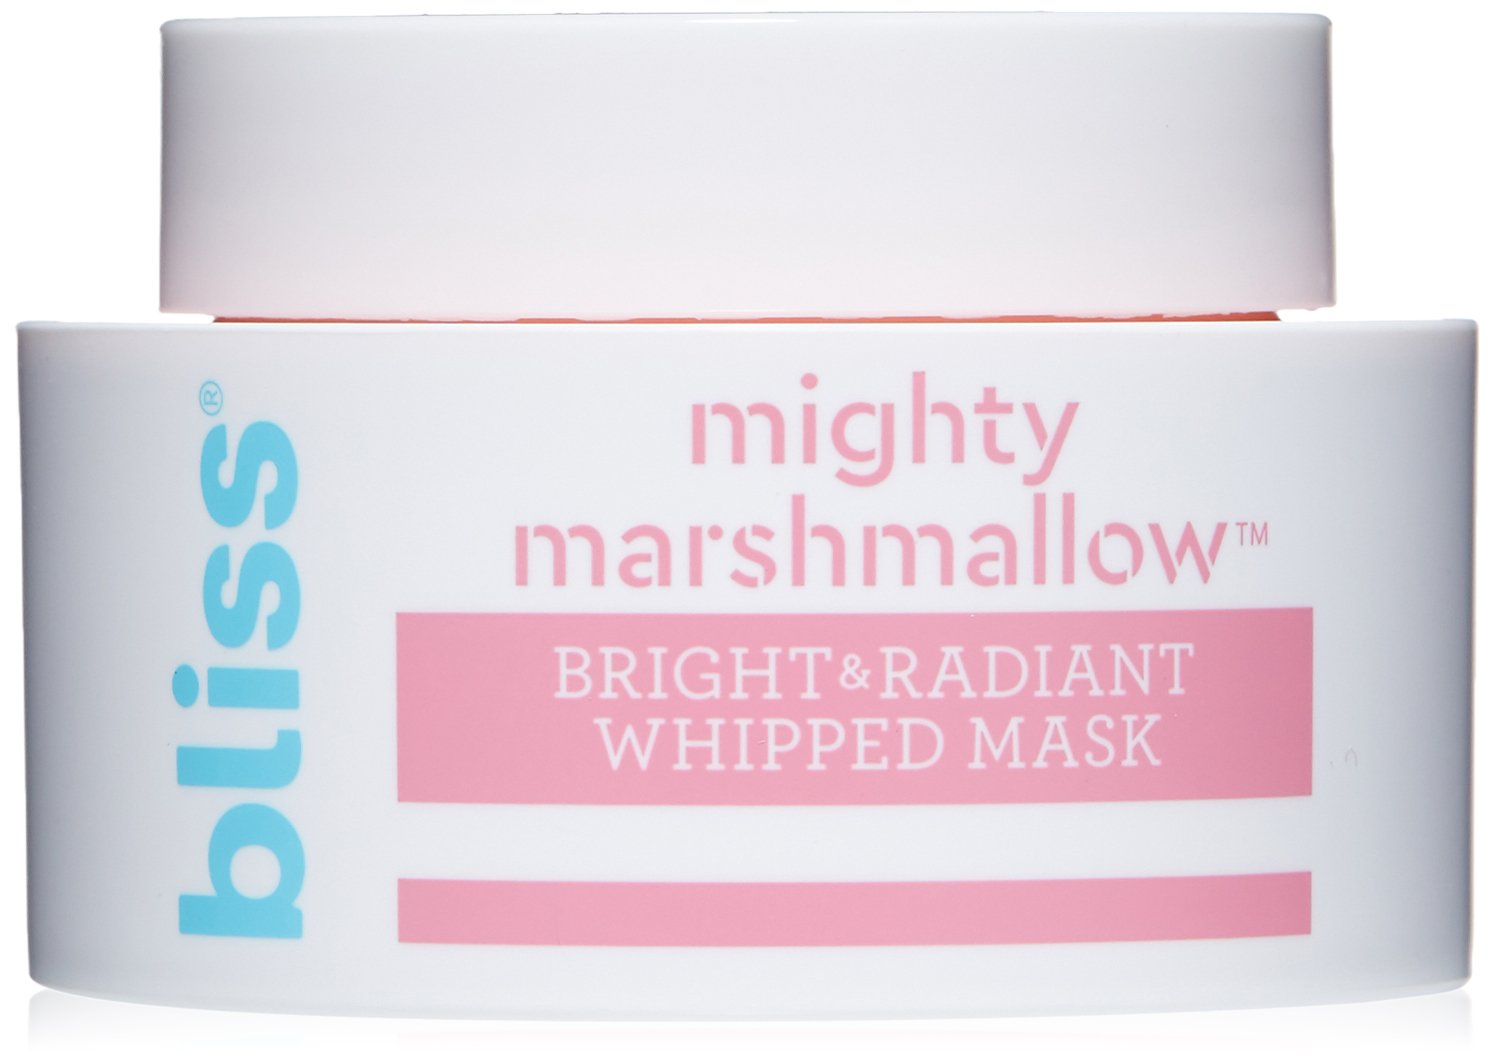 Bliss Mighty Marshmallow Bright & Radiant Whipped Mask - Brightening & Hydrating Face Mask - 1.7 Oz - Luminious Skin - Clean - V